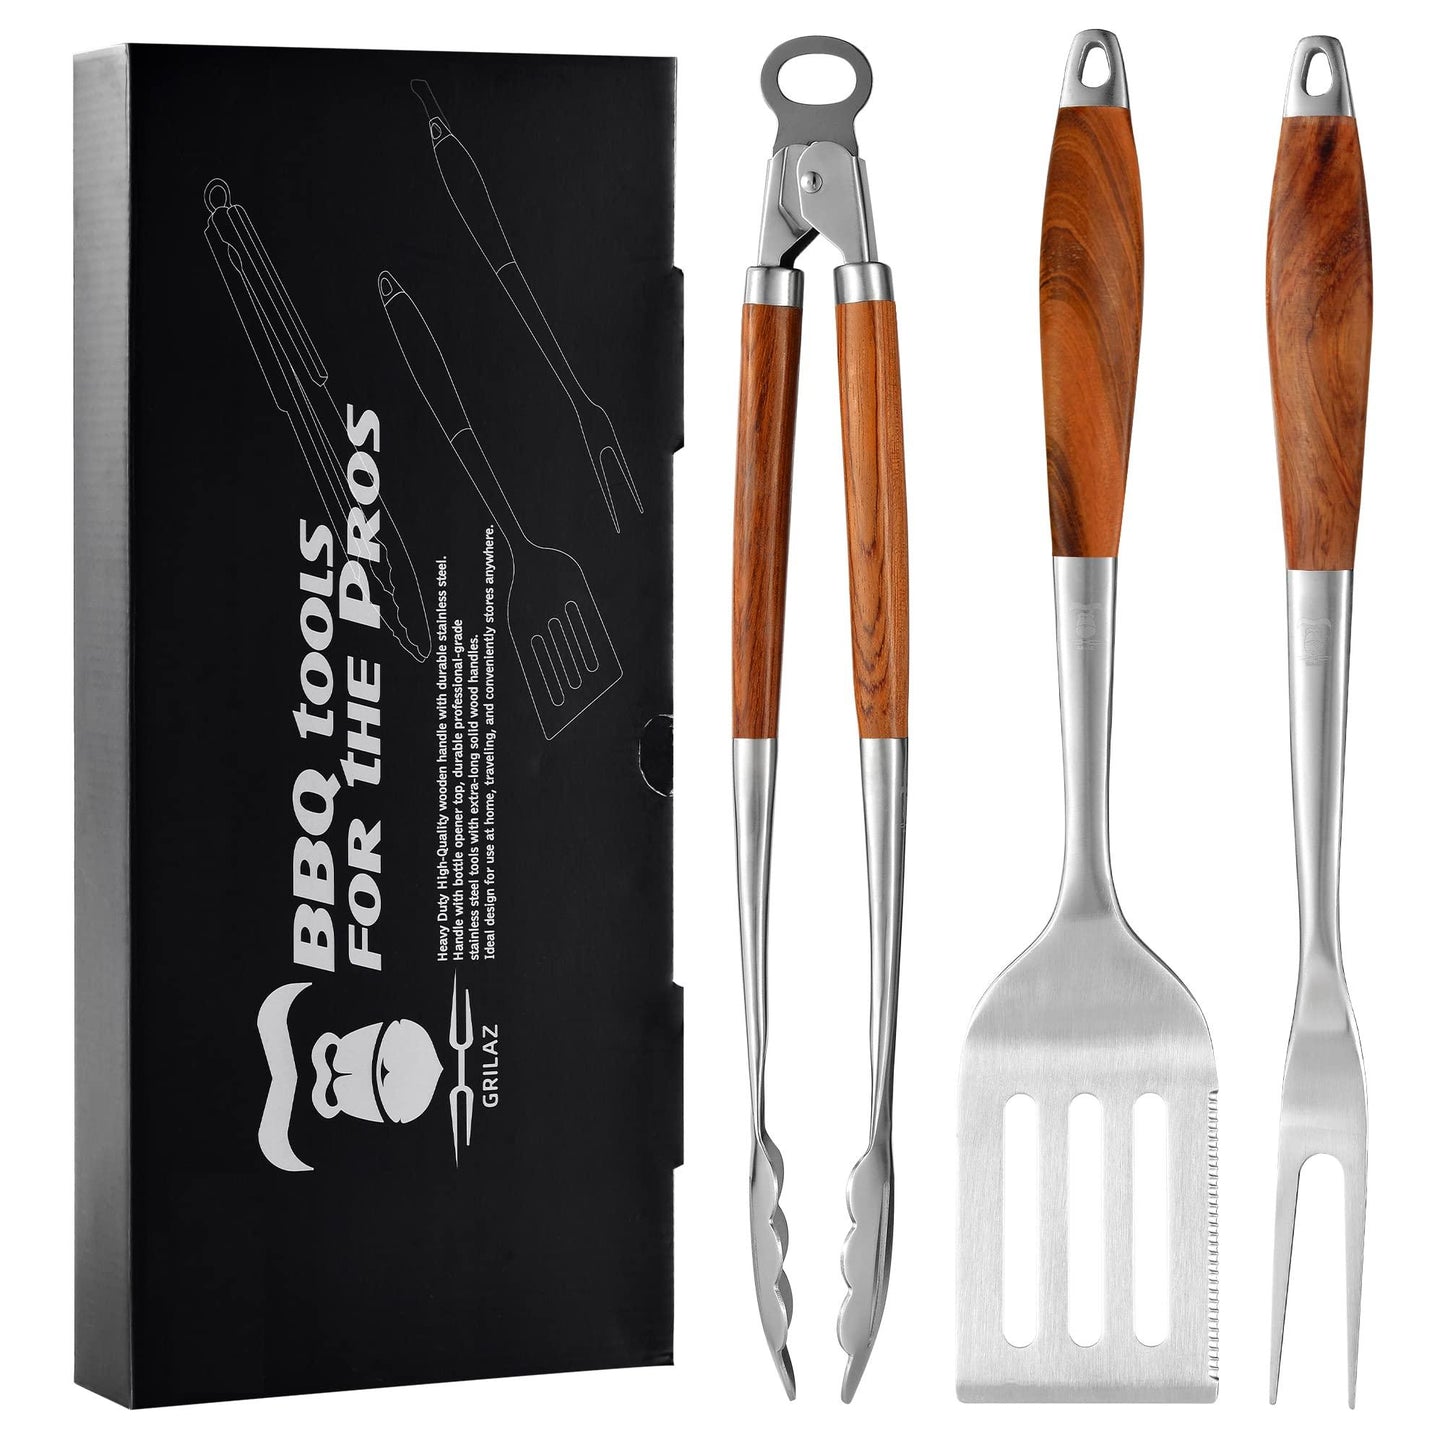 GRILAZ Heavy-Duty Rose Wooden BBQ Grilling Tools Set. Extra Thick Stainless Steel Multi-Function Spatula, Fork & Tongs | Essential Accessories for Barbecue & Grill. Ideal Gift for Father - CookCave